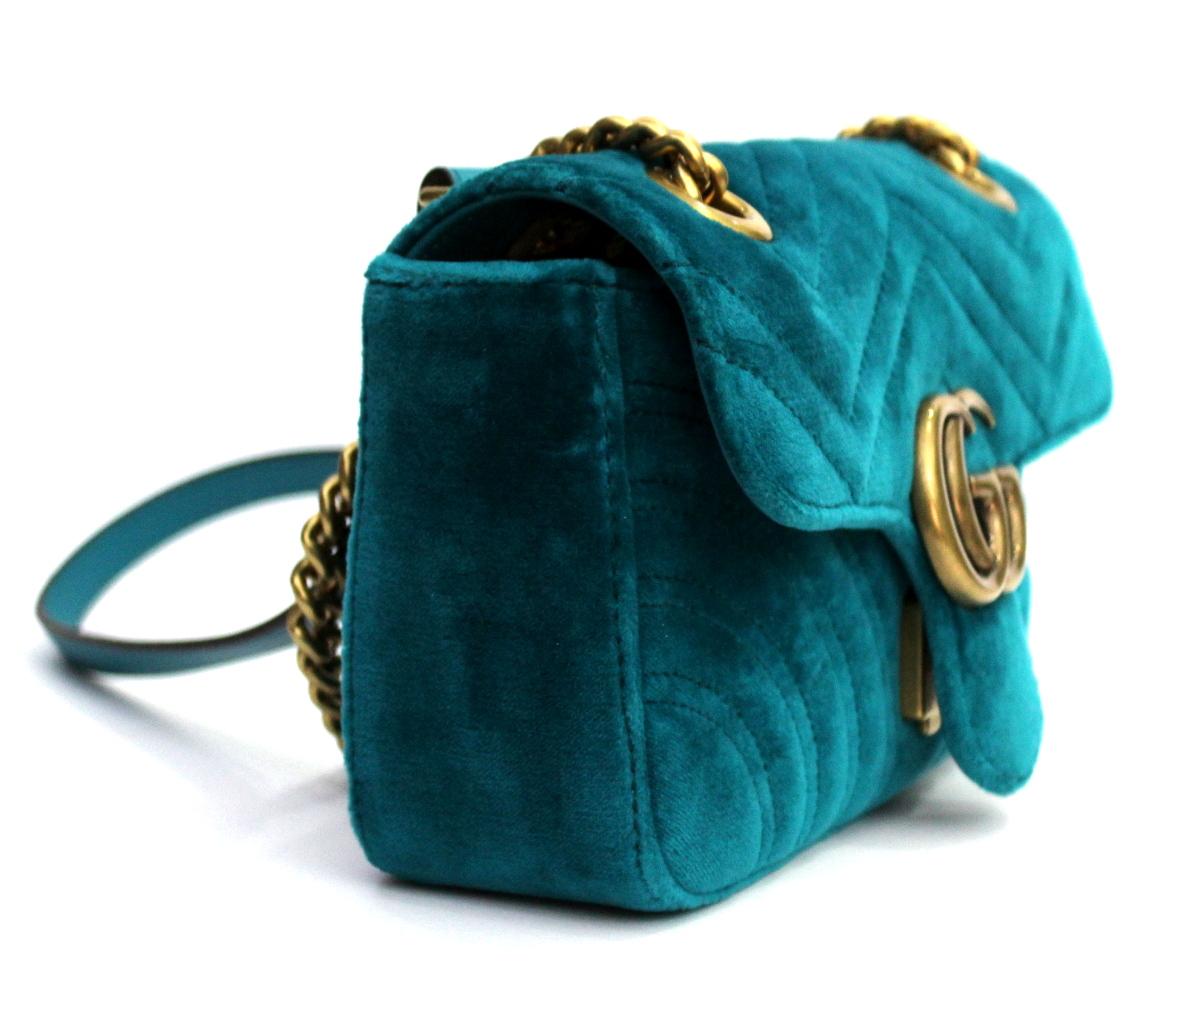 -Petrol blue velvet with chevron pattern and heart;
-Antique gold-colored finishes;
-Double G;
-Inside pocket with zipper;
-The sliding chain shoulder strap can be worn as a shoulder strap, height (light) 55cm, or with double handles, height (light)